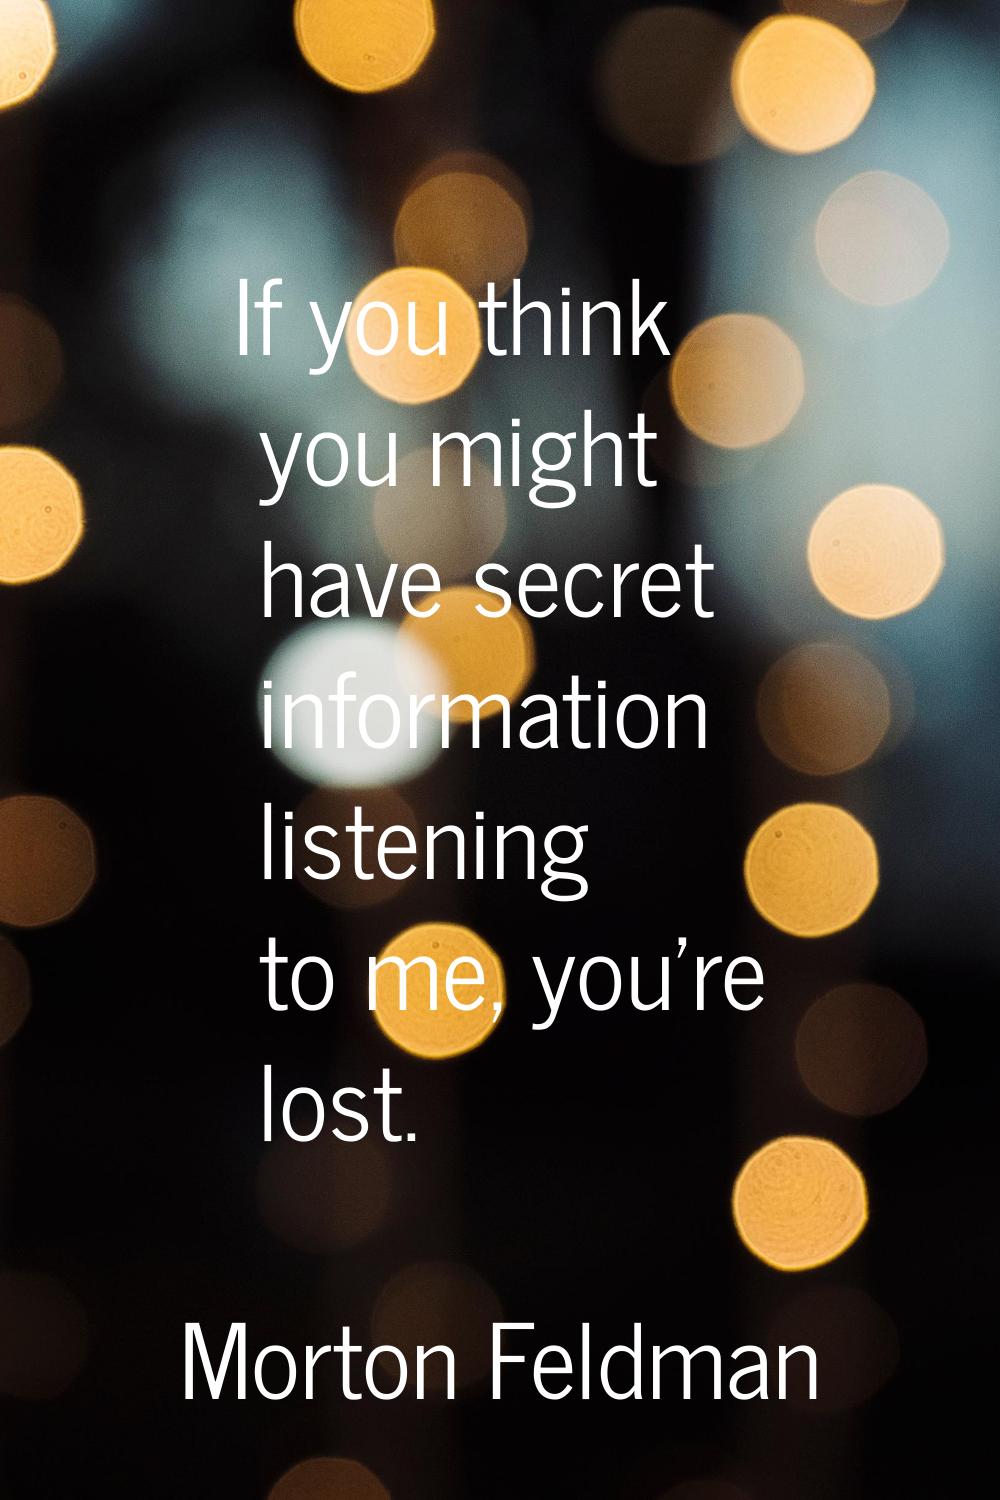 If you think you might have secret information listening to me, you're lost.